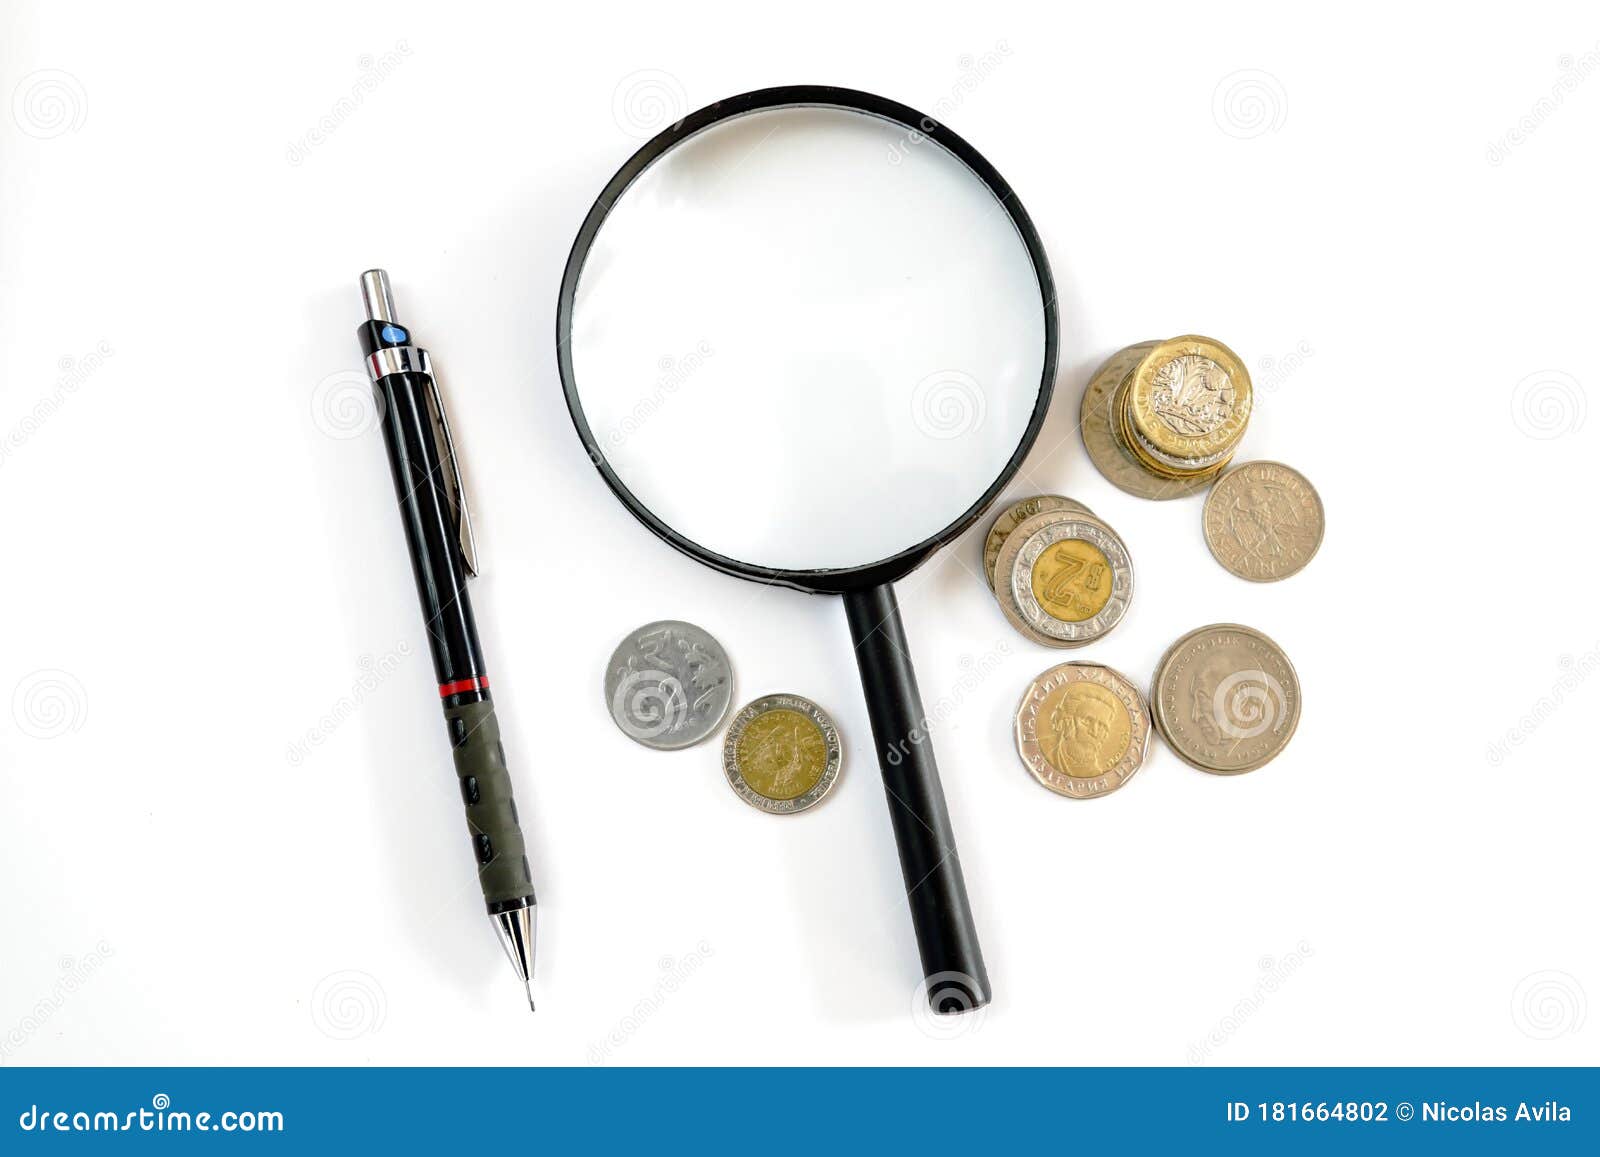 magnifying glass, coins of various countries